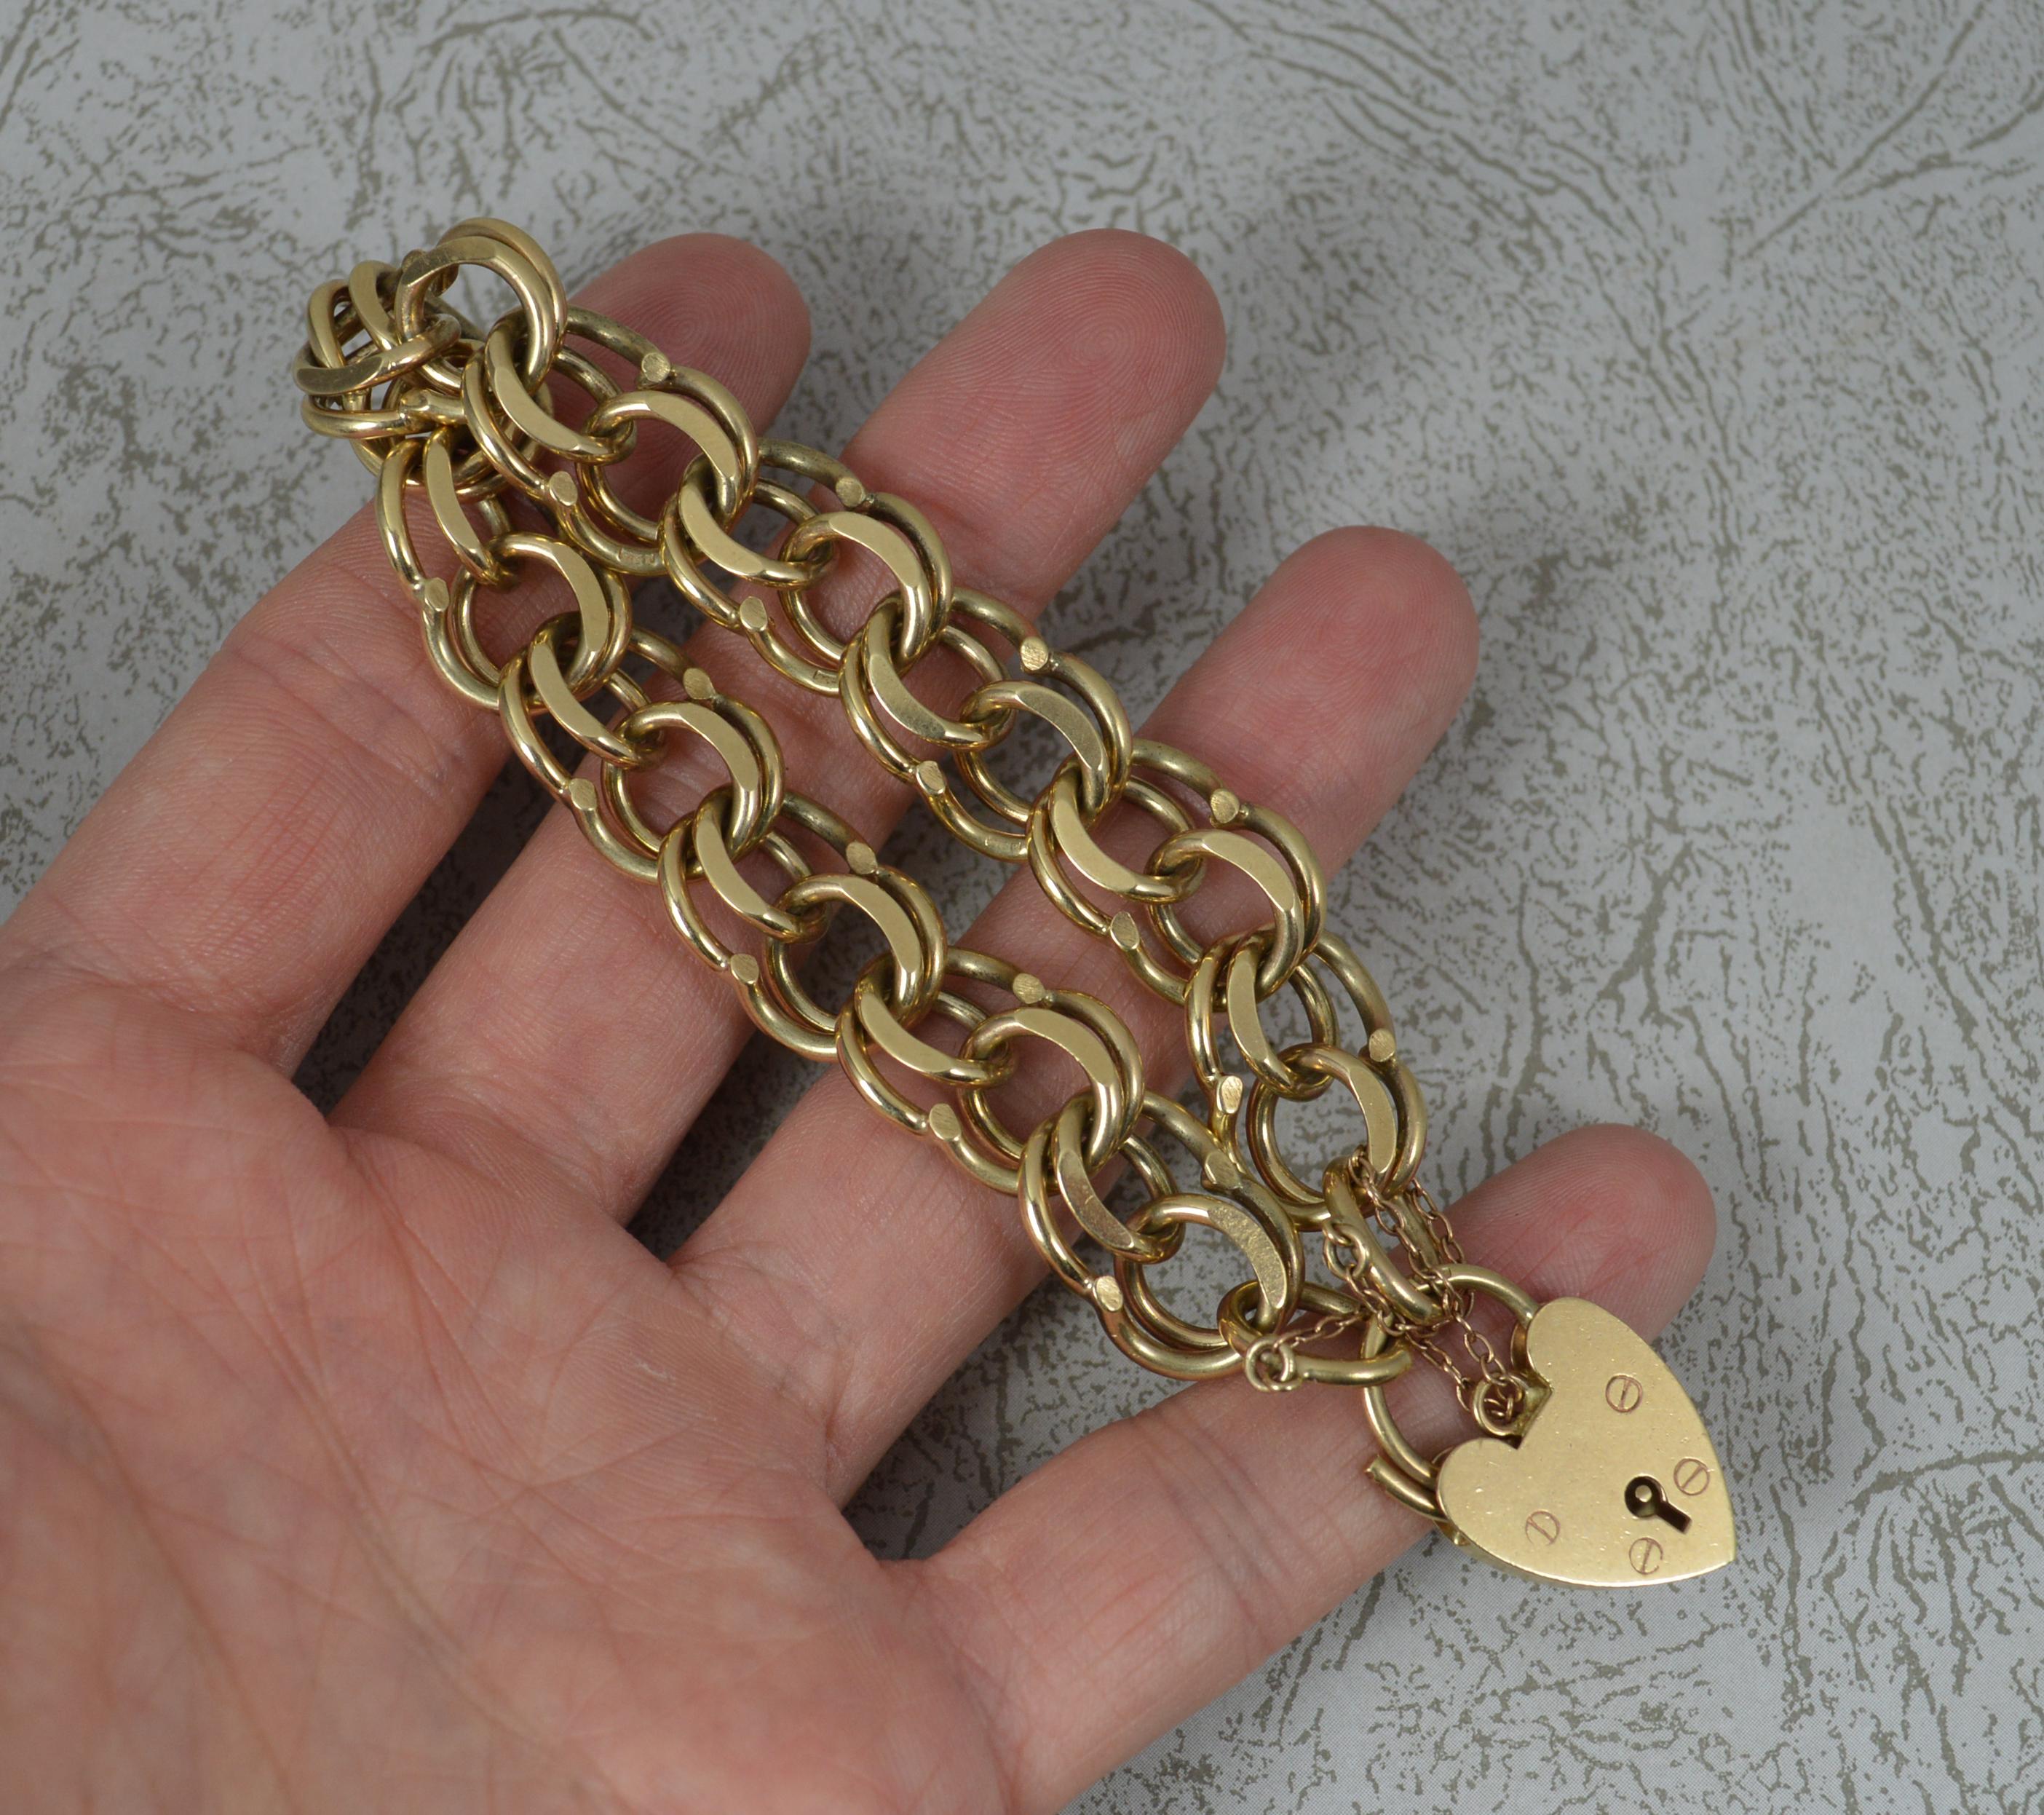 A superb vintage bracelet.
A heavy 9 carat gold example.
9ct yellow gold, double eight shaped curb links. Complete with padlock and safety chain.

CONDITION ; Very good for age. Working clasp. Crisp design. Issue free. Please view